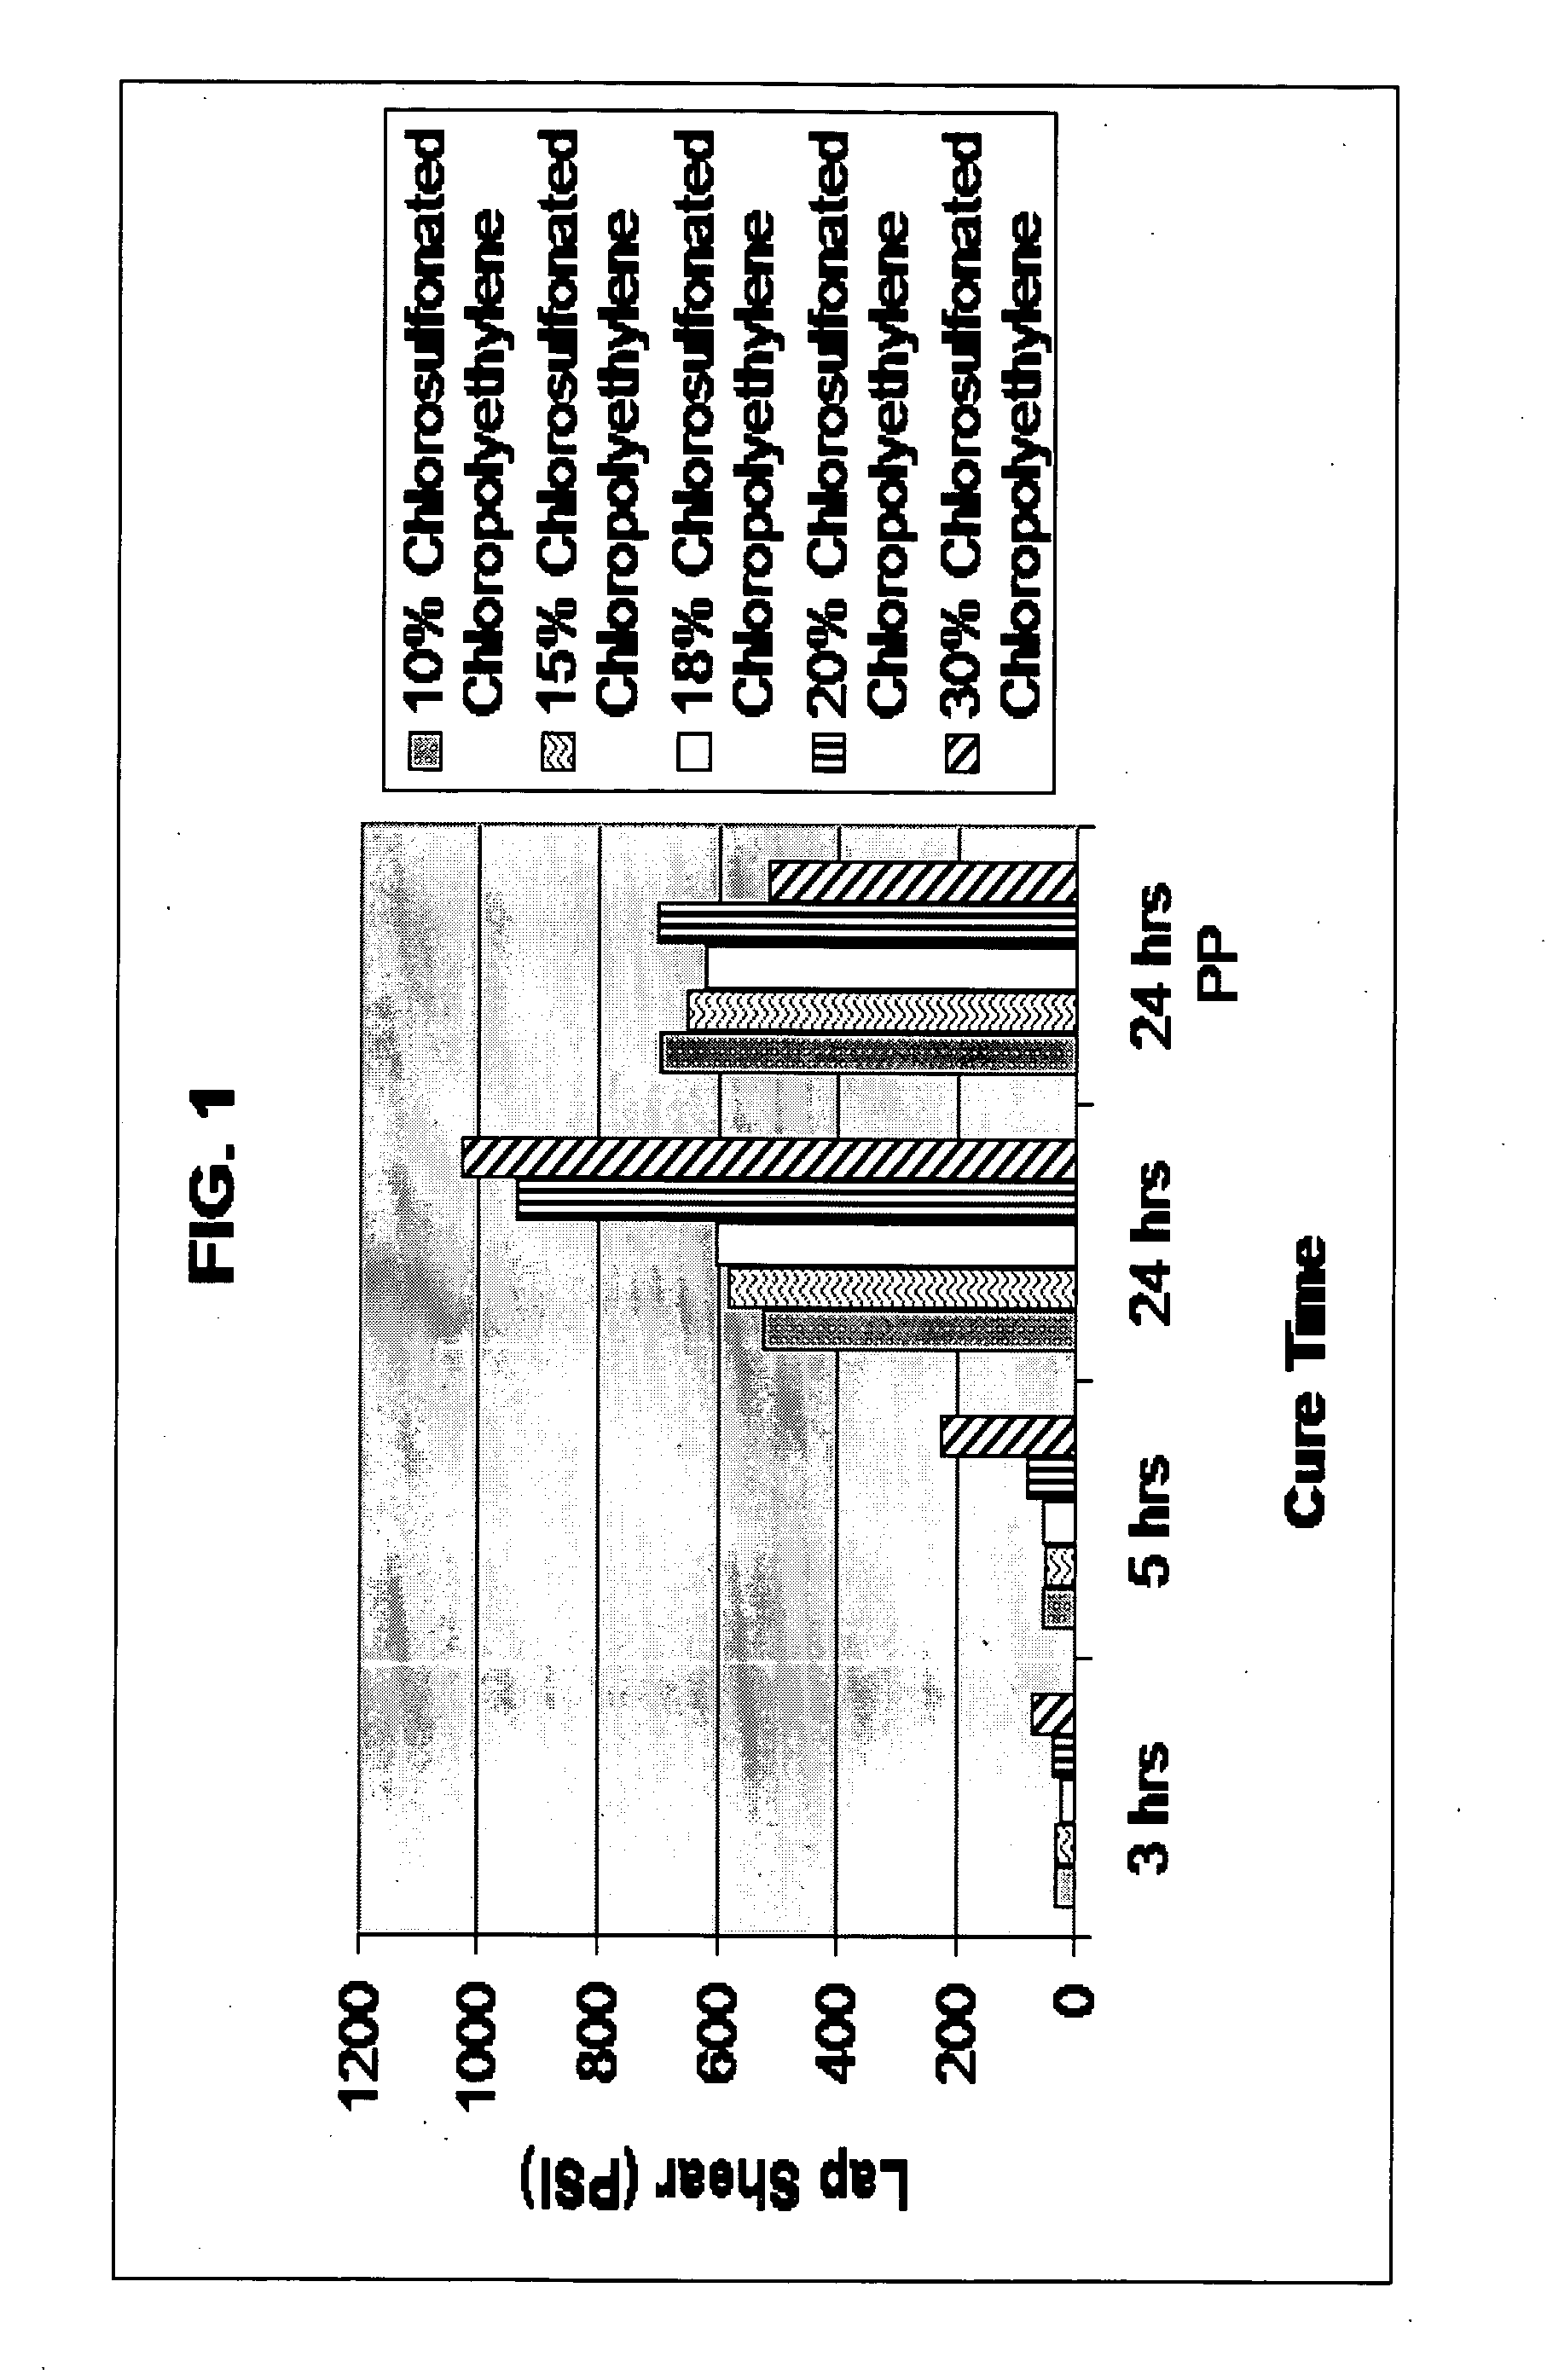 Accelerated organoborane initiated polymerizable compositions